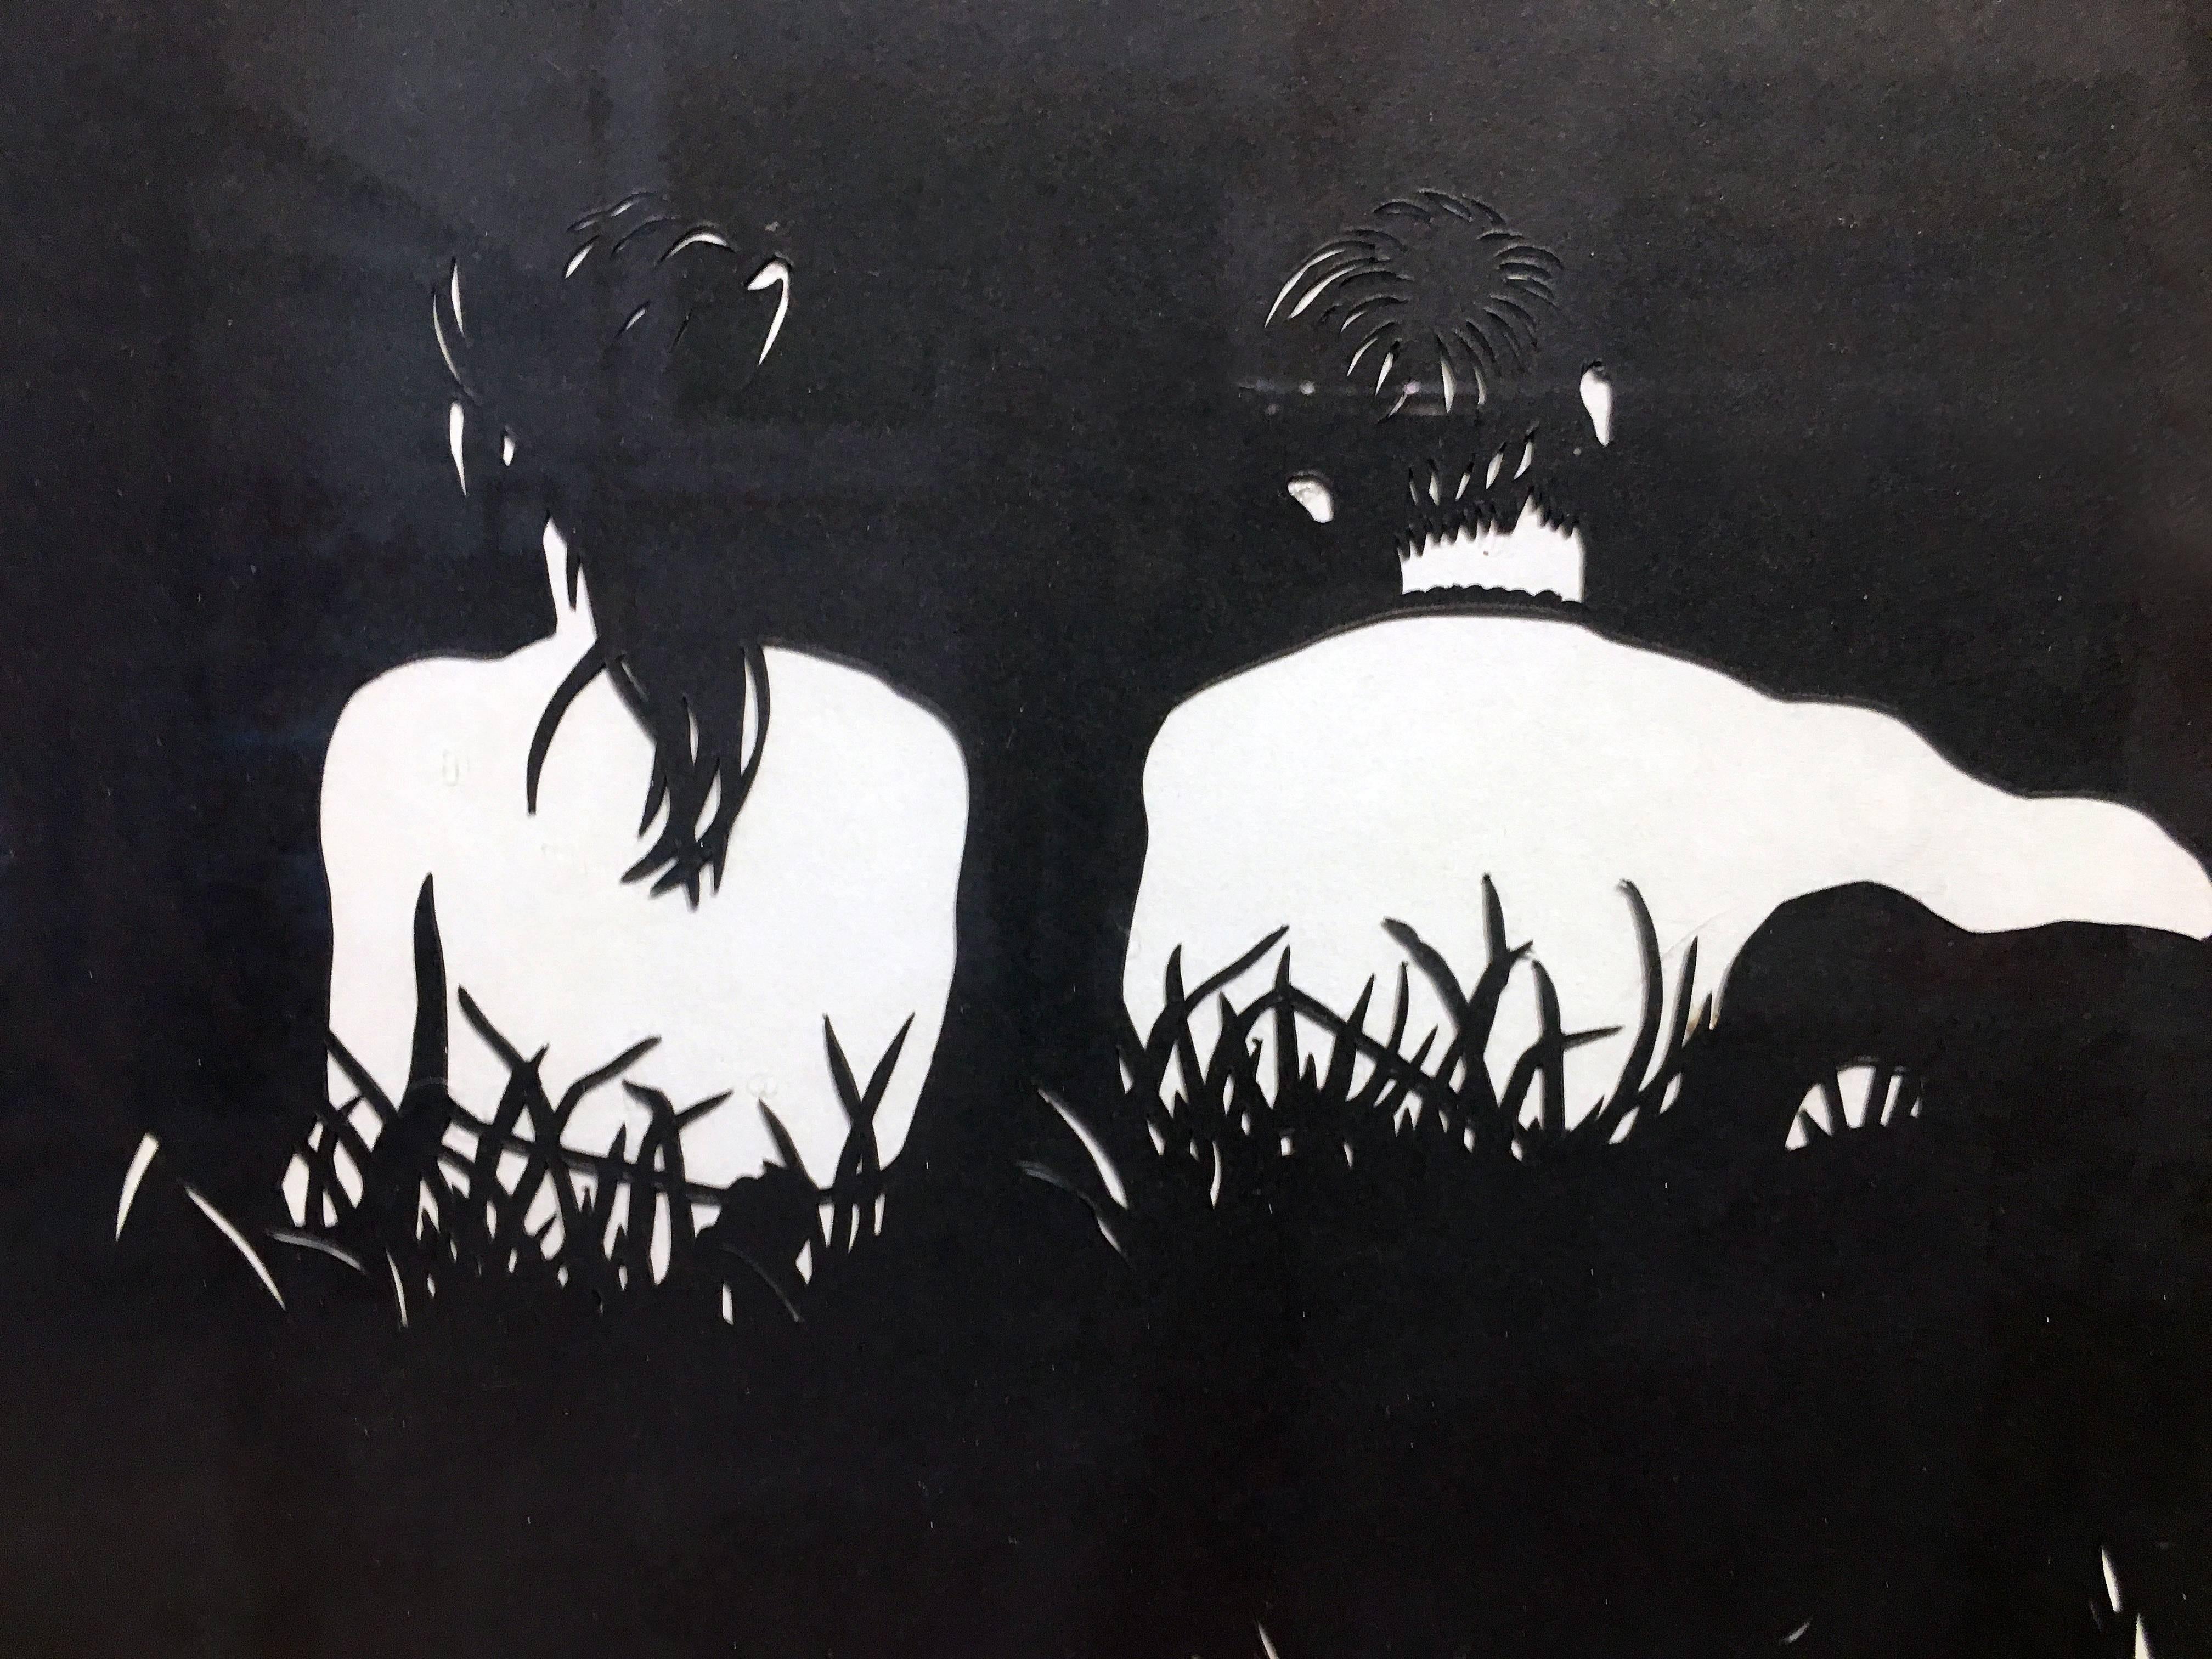 'Landscape' circa 2007 by German artist, Stefan Thieli. Paper cutout, 55.75 x 79.25 in.  Reminiscent of shadow play, this large-scale, black, cut-out silhouette features a thick forest landscape with two figures, a woman and man, observing the